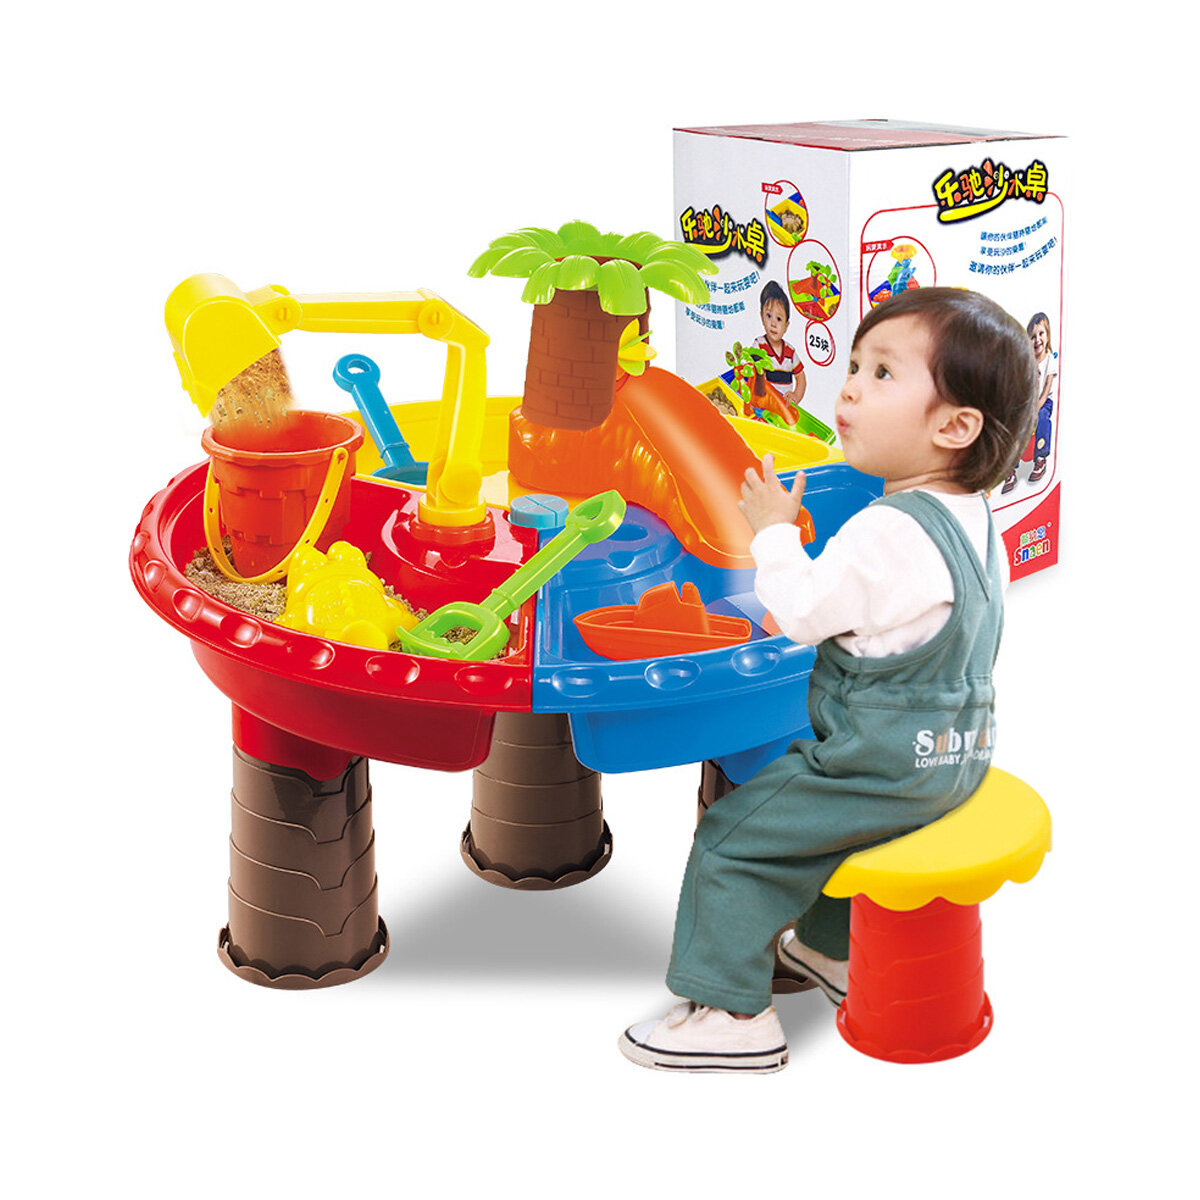 2 IN 1 Multi-style Summer Beach Sand Kids Play Water Digging Sandglass Play Sand Tool Set Toys for K